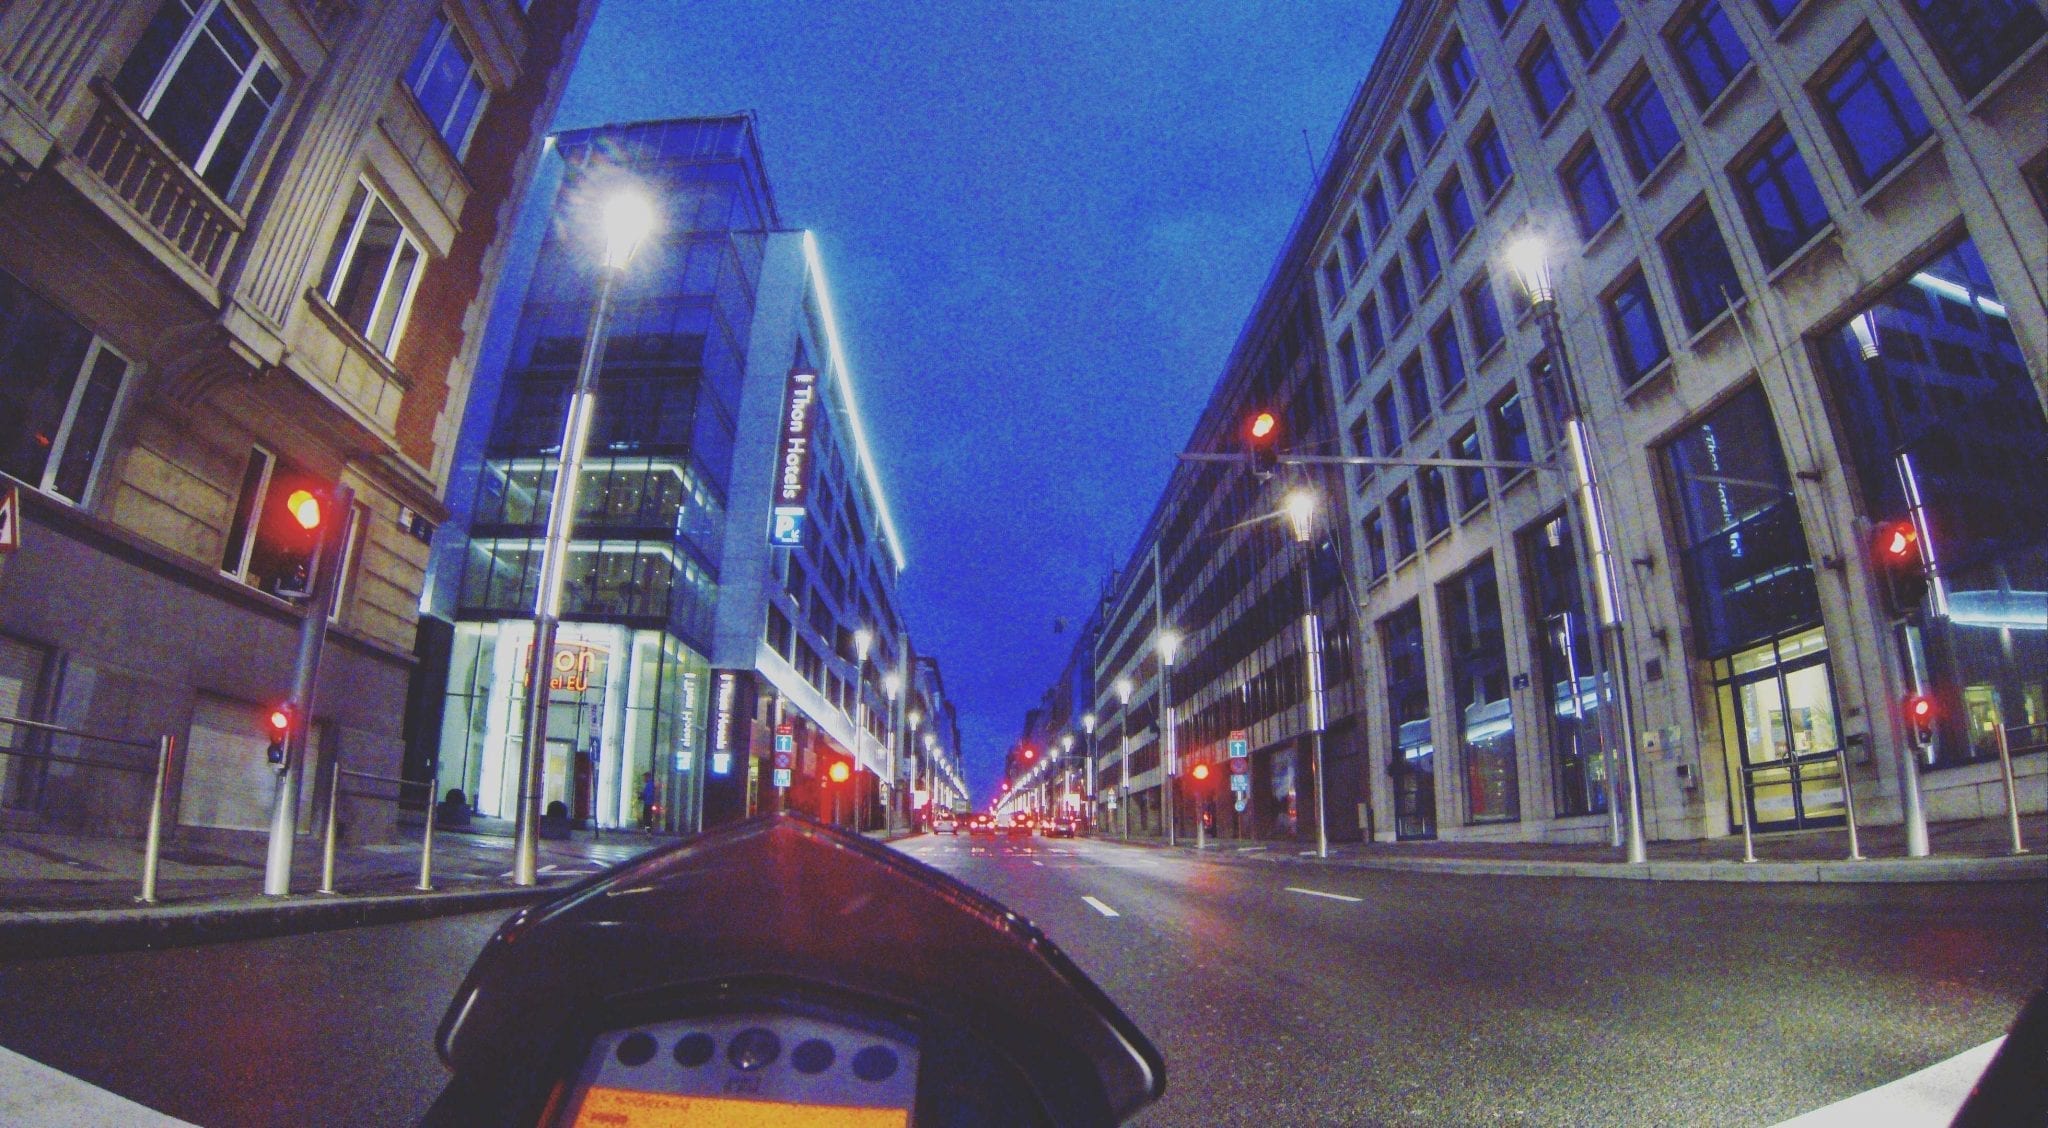 An advertising display on Facebook showcasing a motorcycle cruising through a city street after dark.